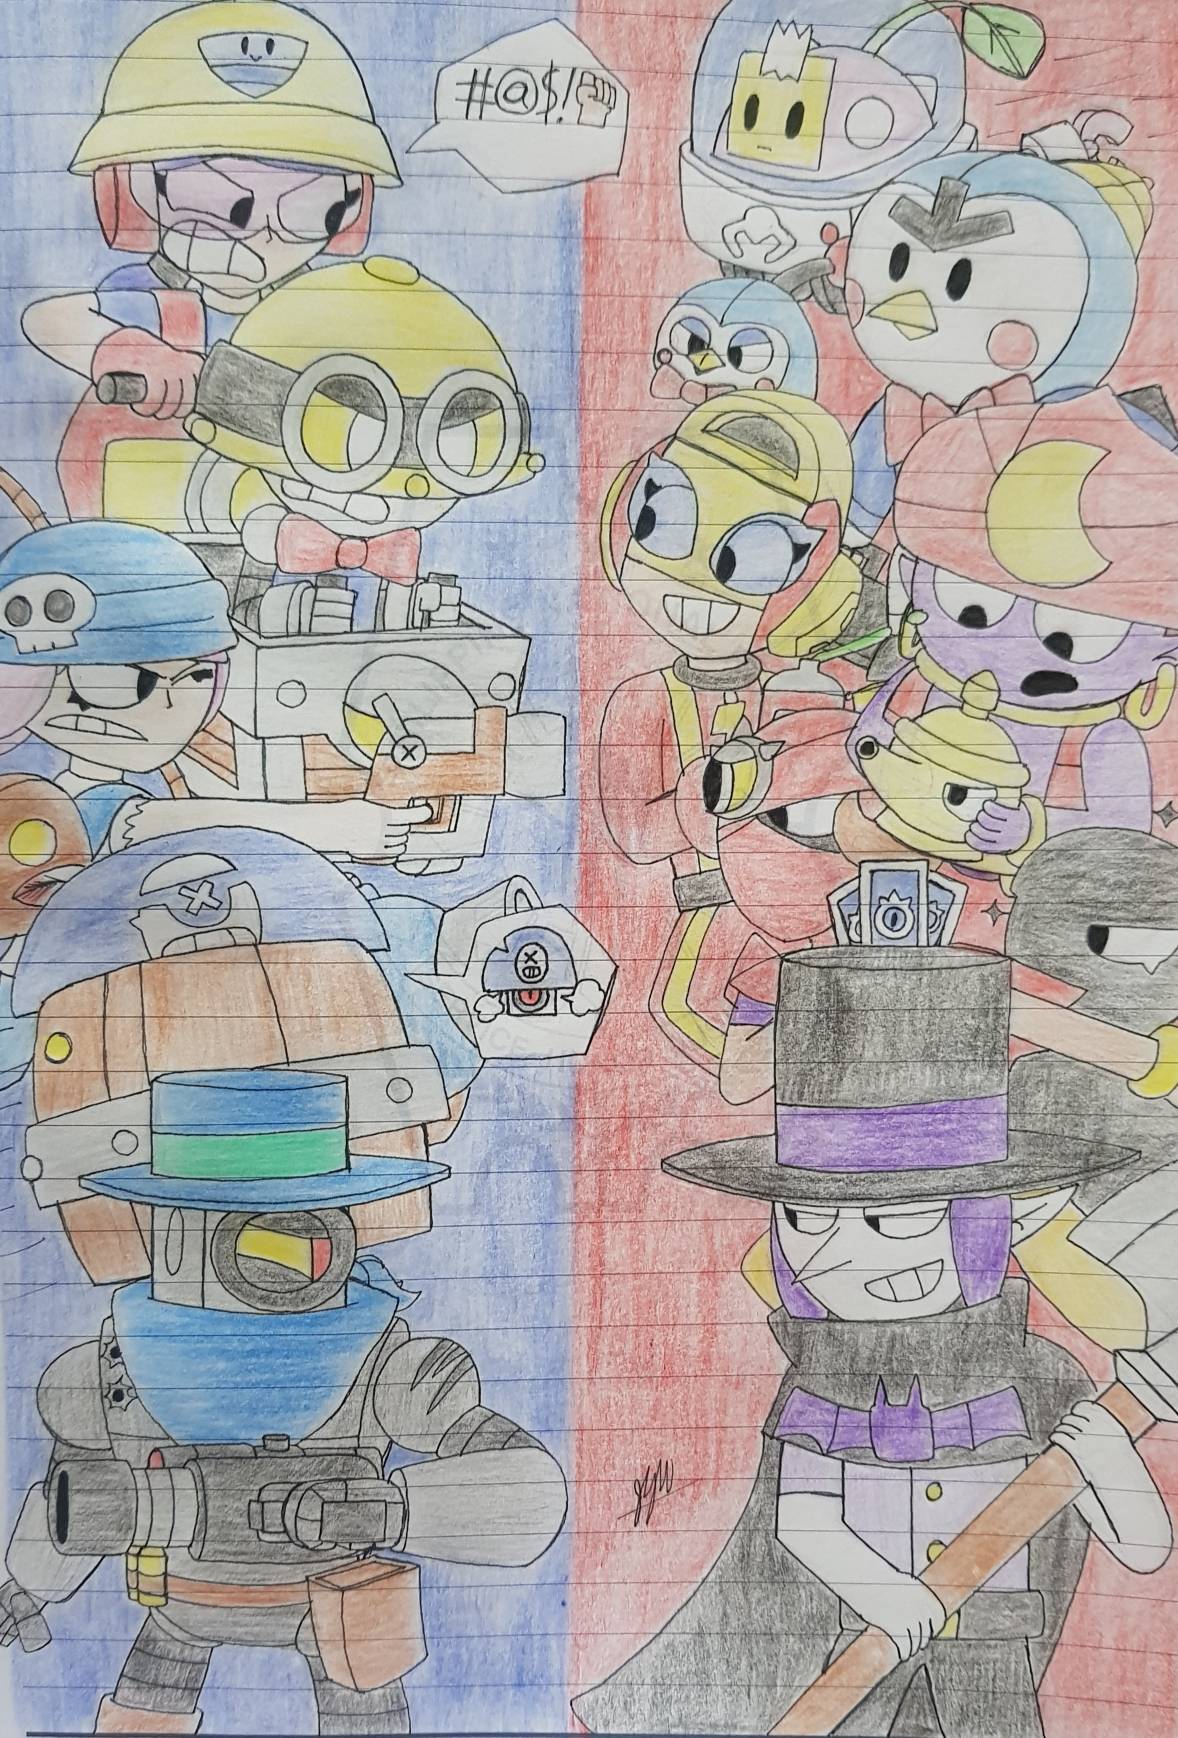 Super Rare Vs Mythic Brawlers 2 By Jerry W On Deviantart - all super rare brawlers in brawl stars